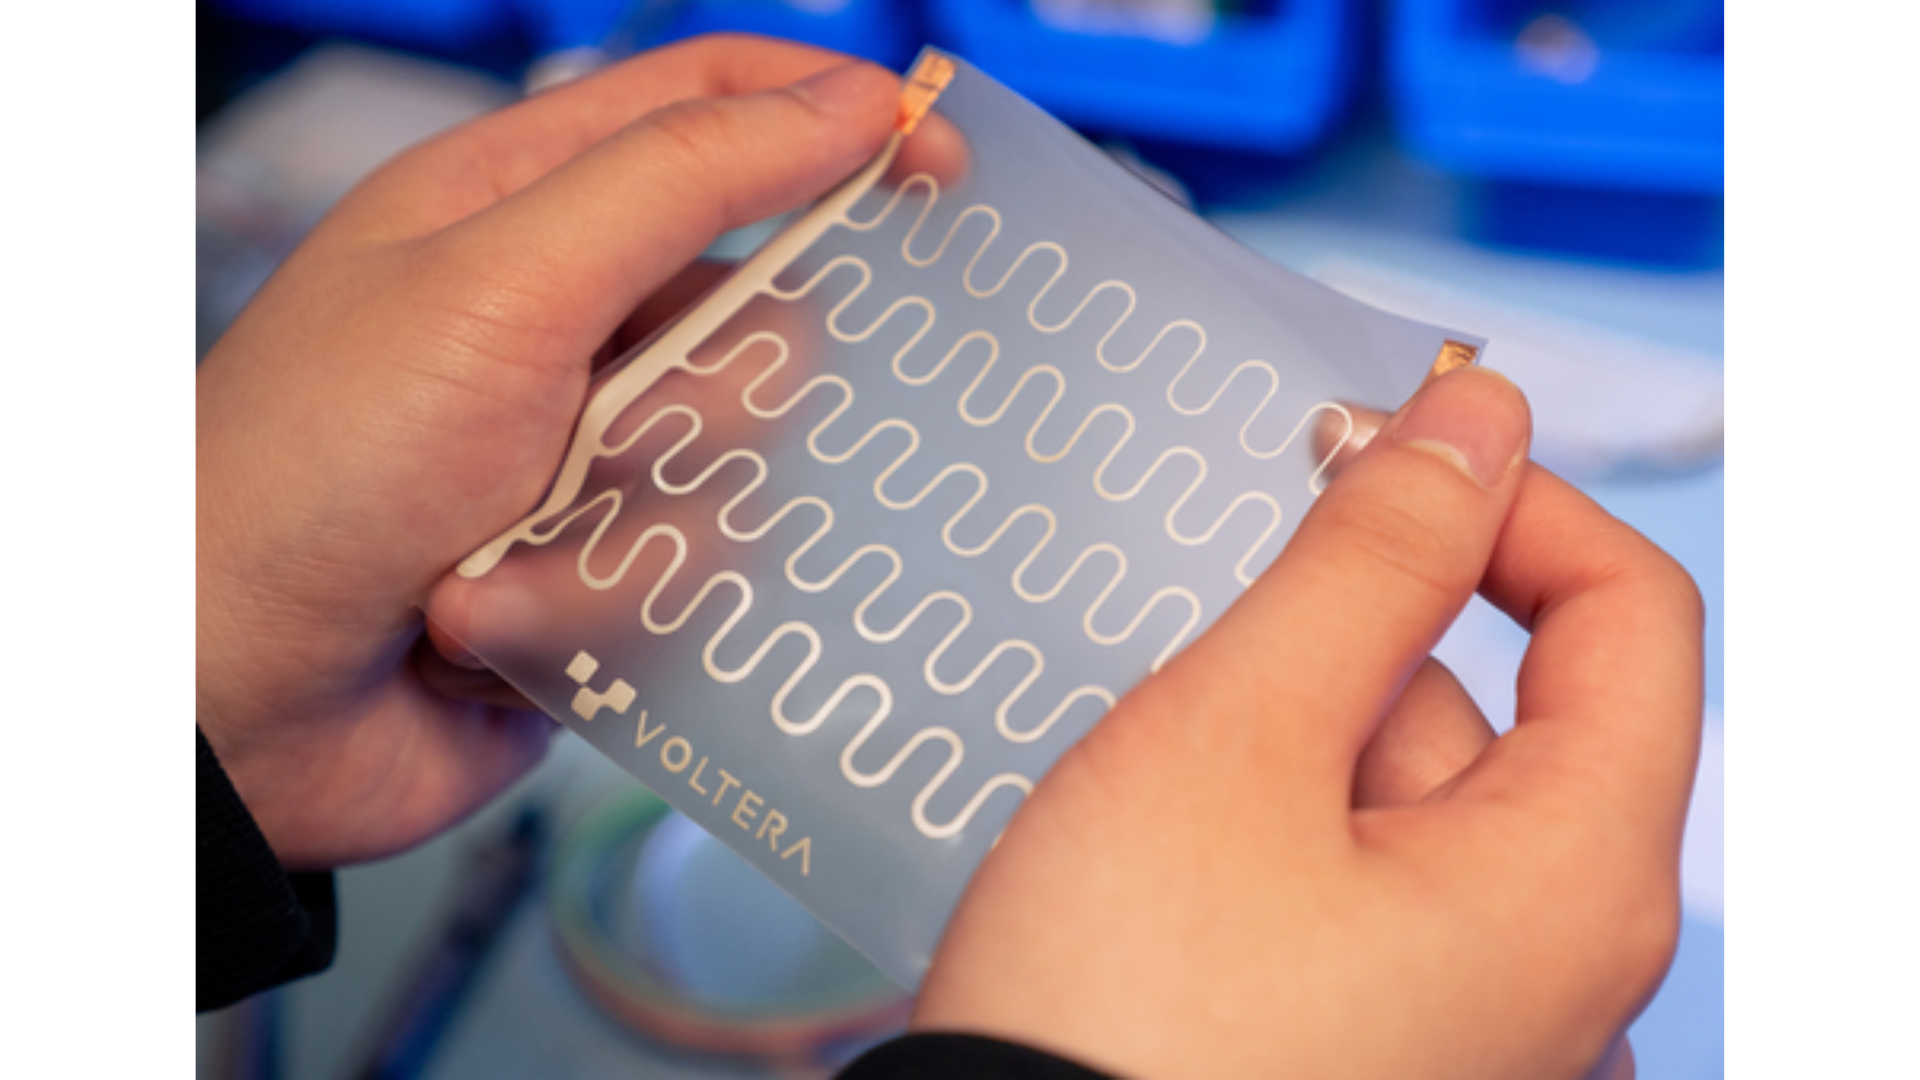 Voltera announced the launch of NOVA using, direct-write technology to print circuits on soft, stretchable, and conformable surfaces.